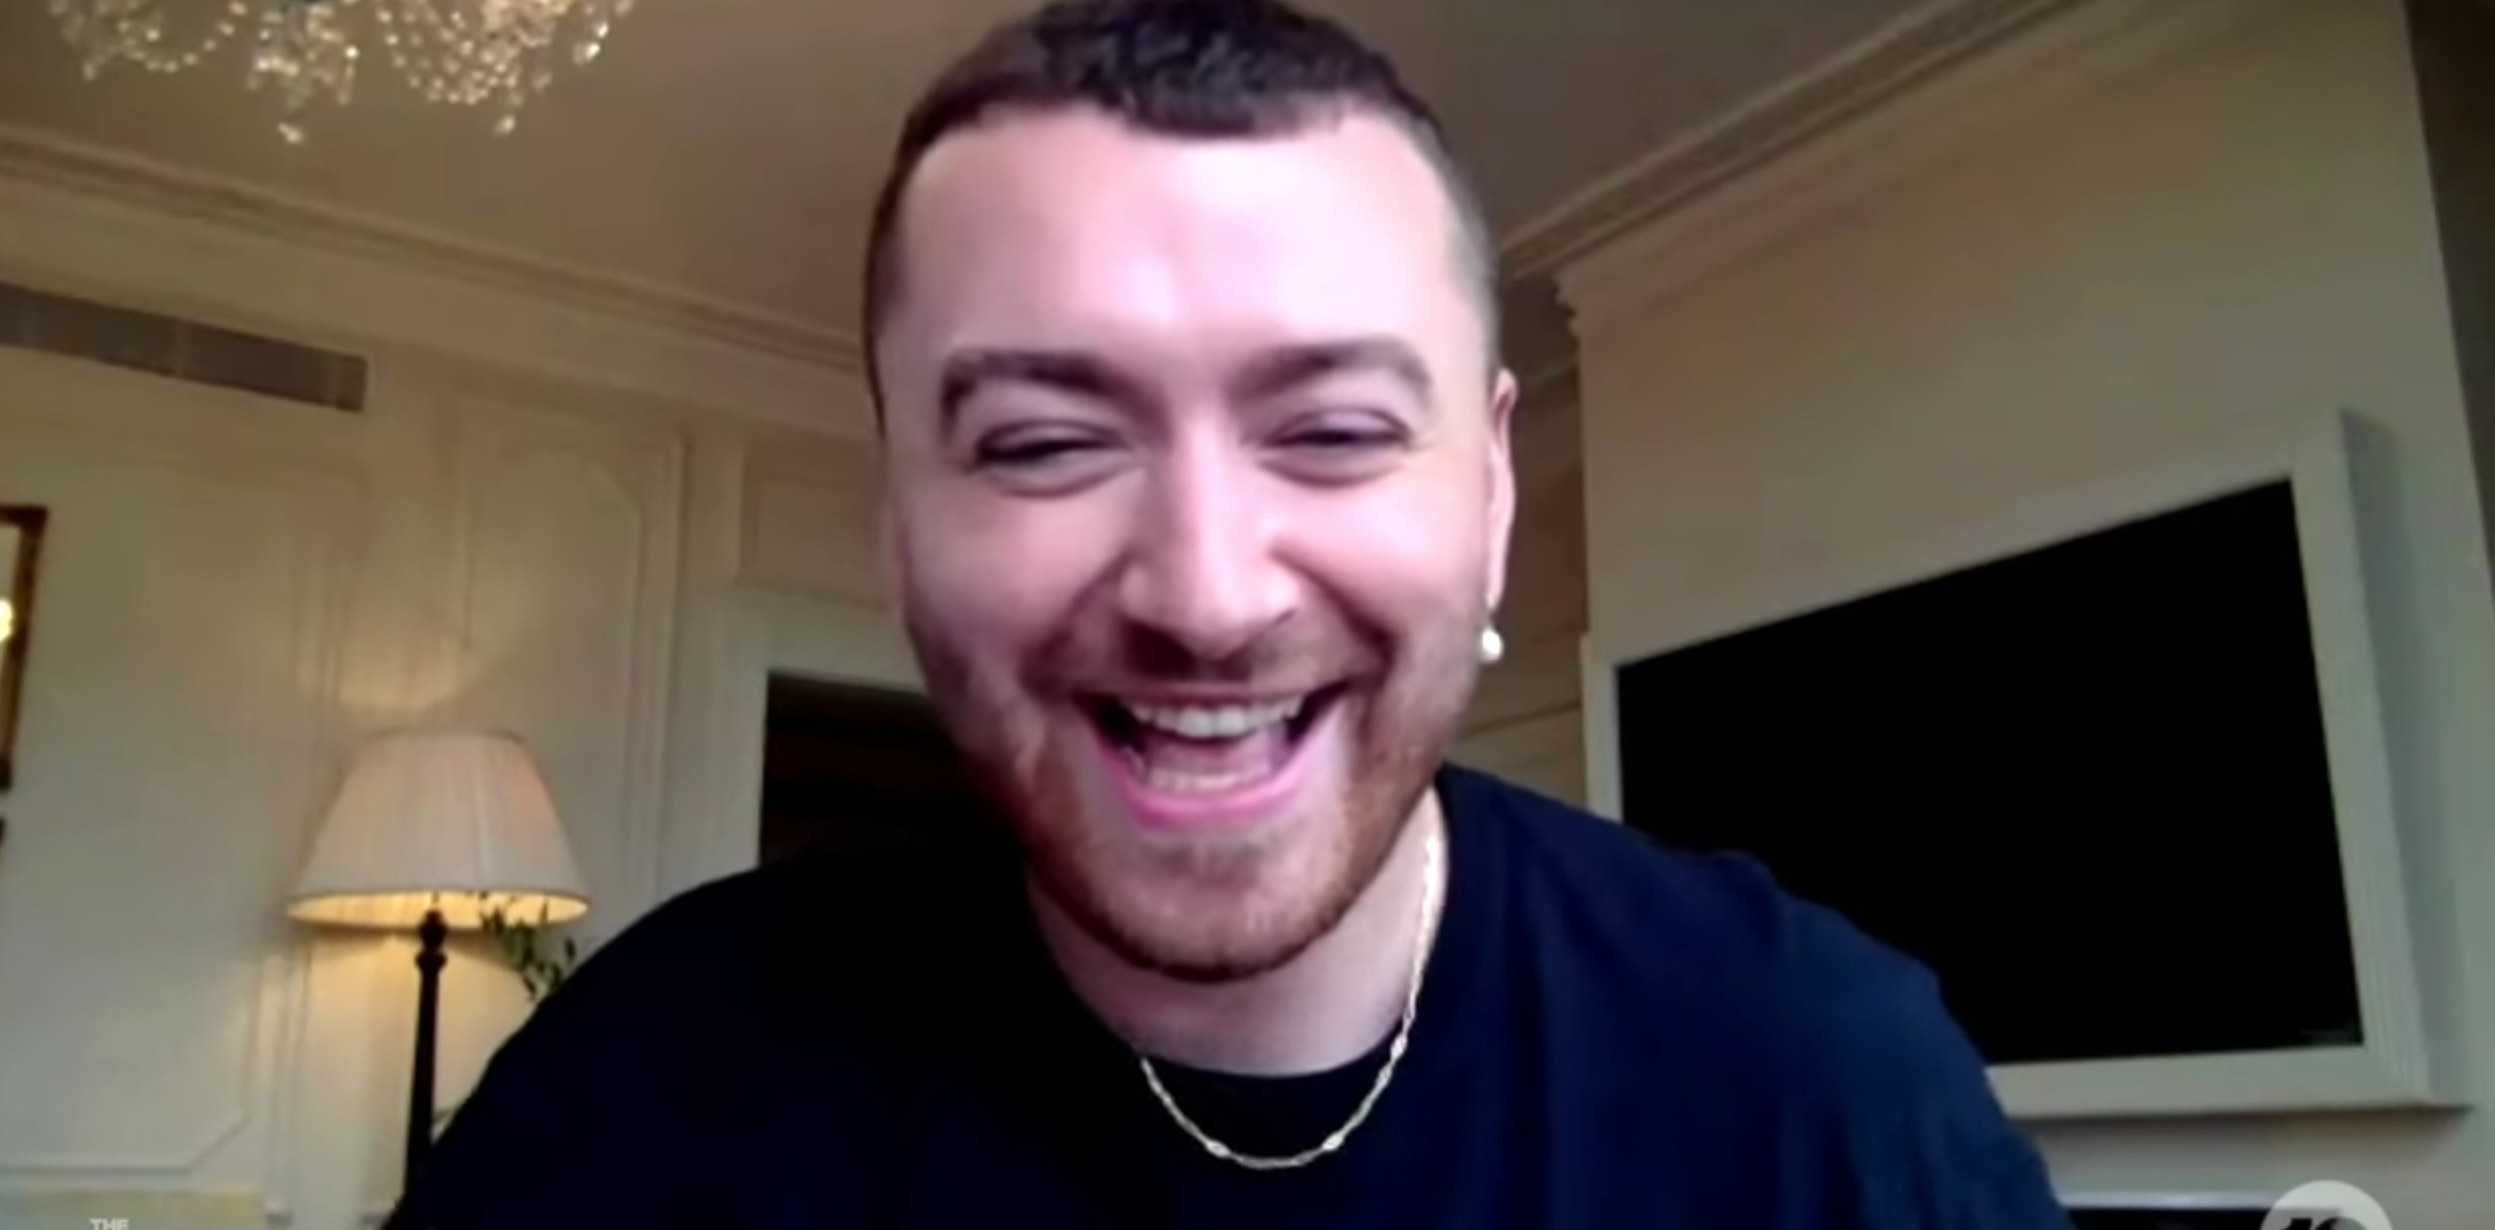 Sam Smith laughing as they recount the story of the mug